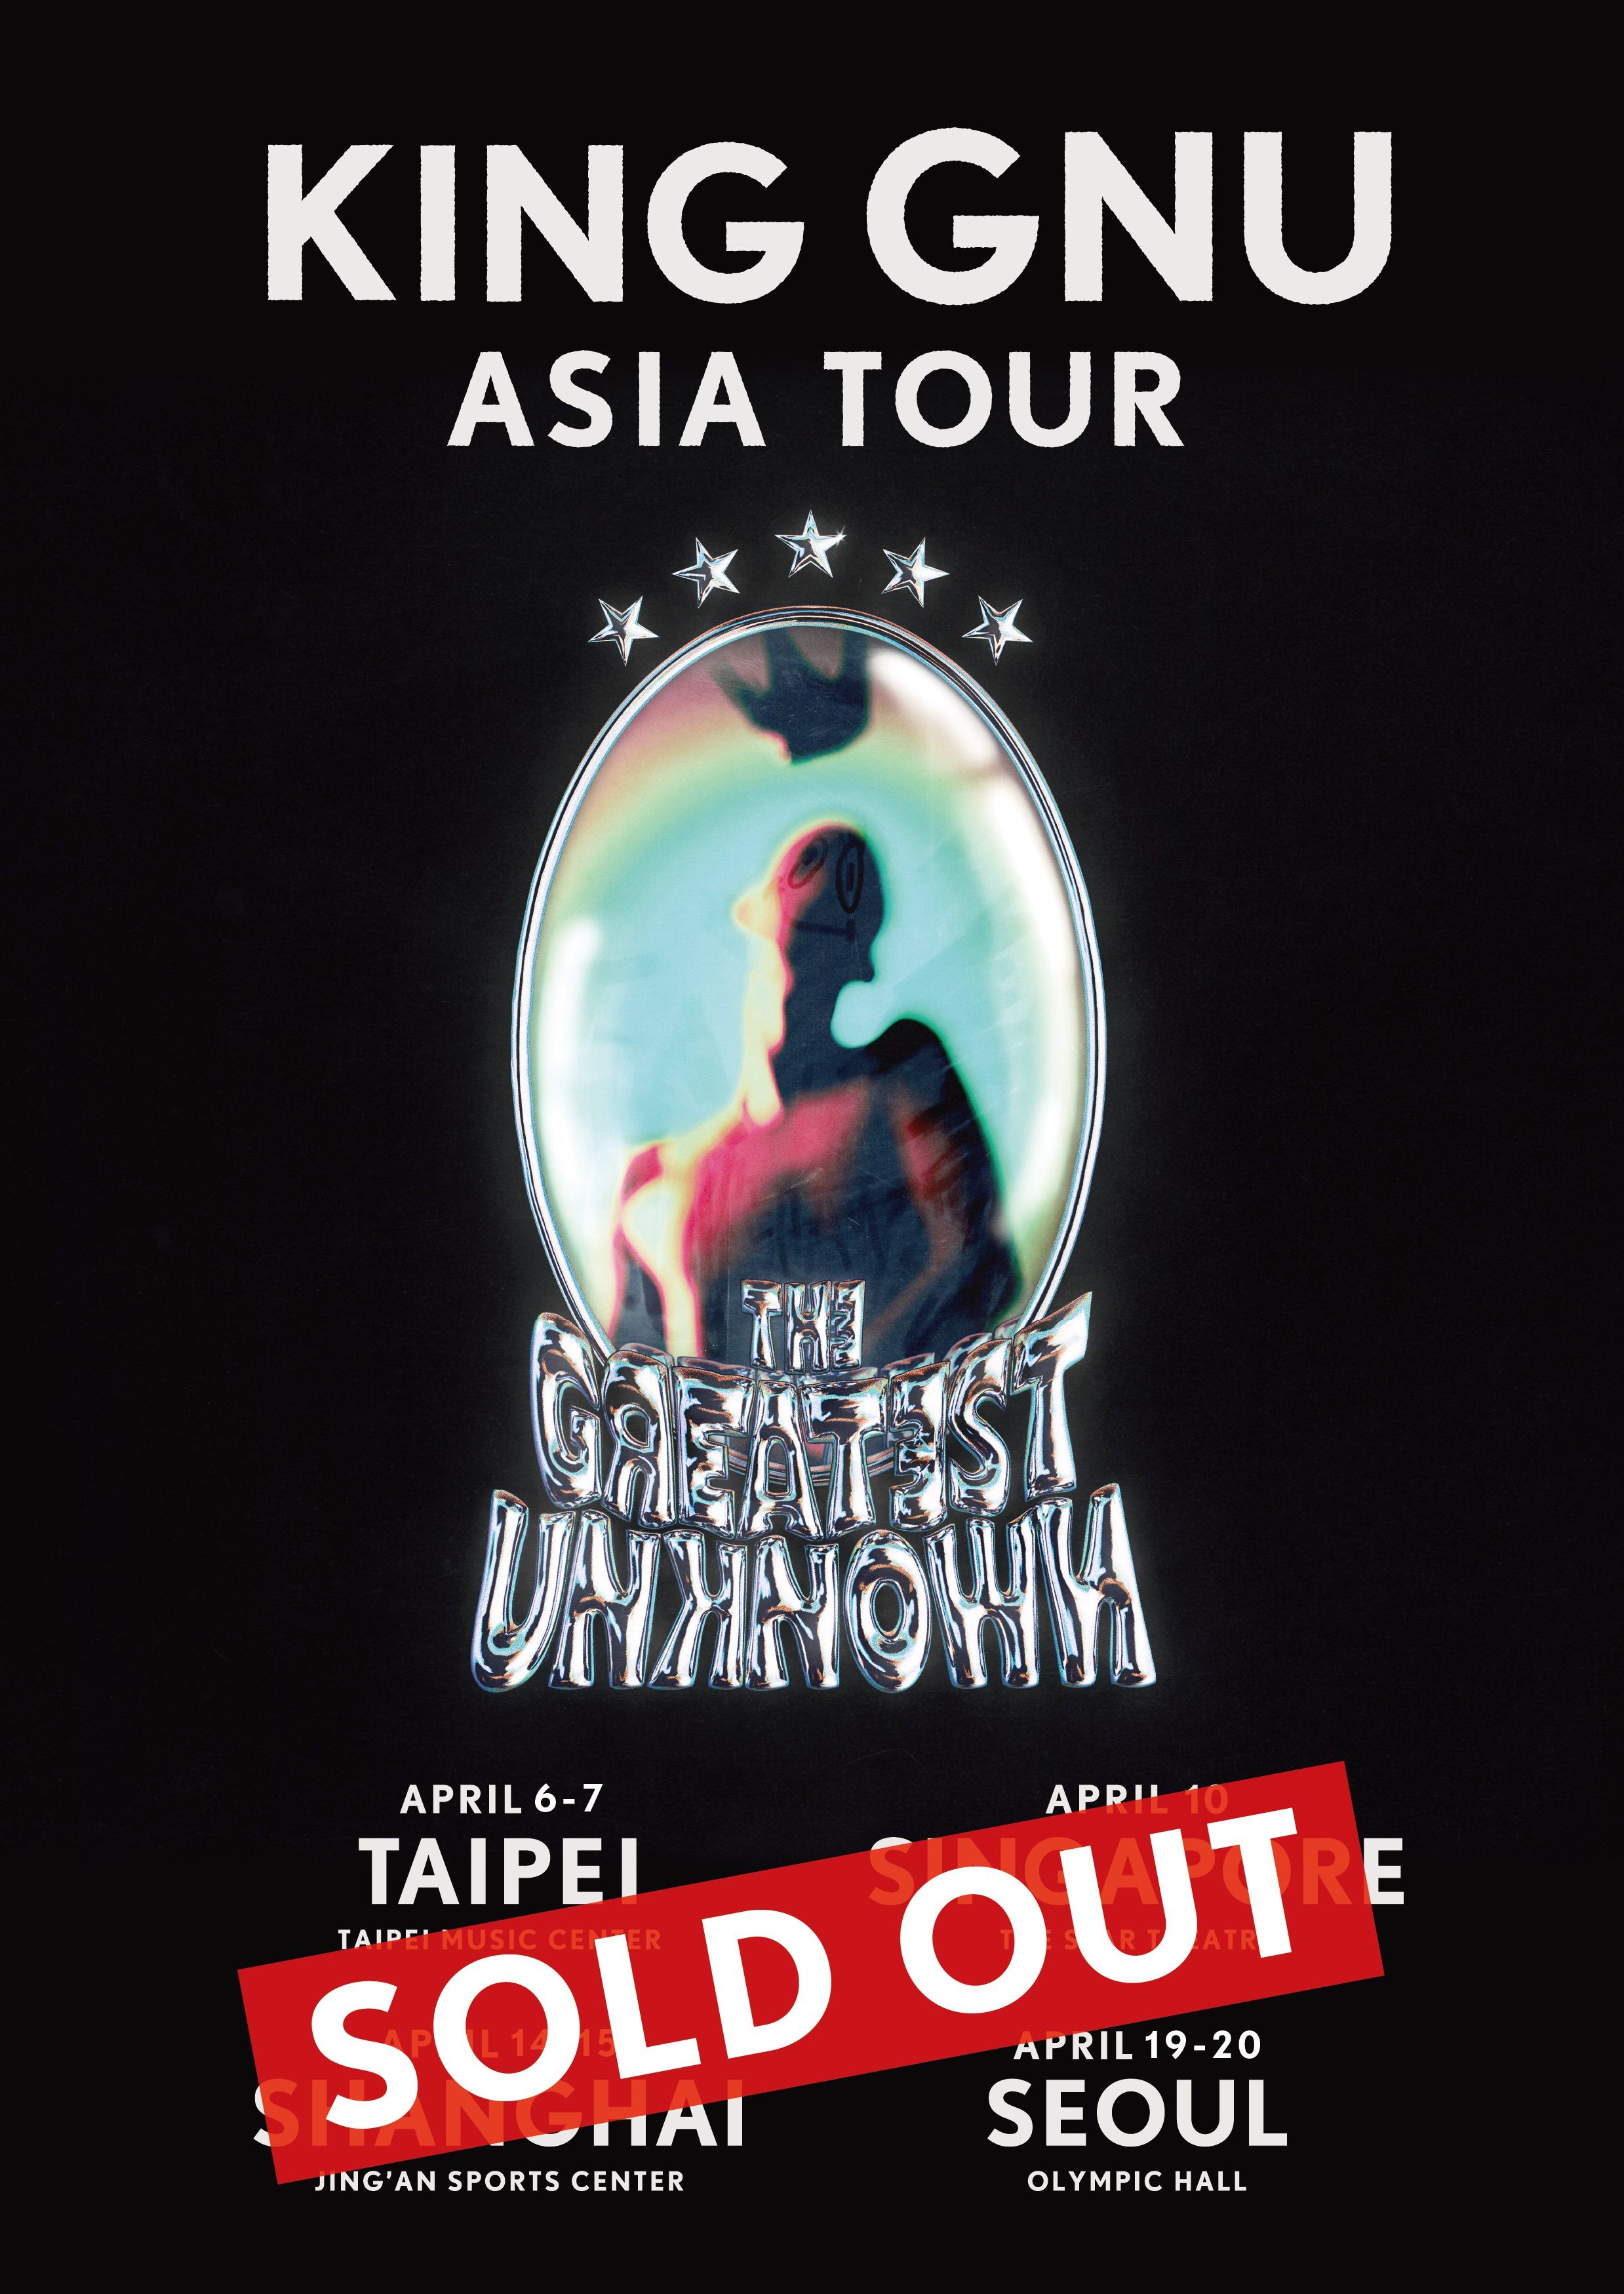 King Gnu Asia Tour 「THE GREATEST UNKNOWN」“ アジア4都市7公演、計 